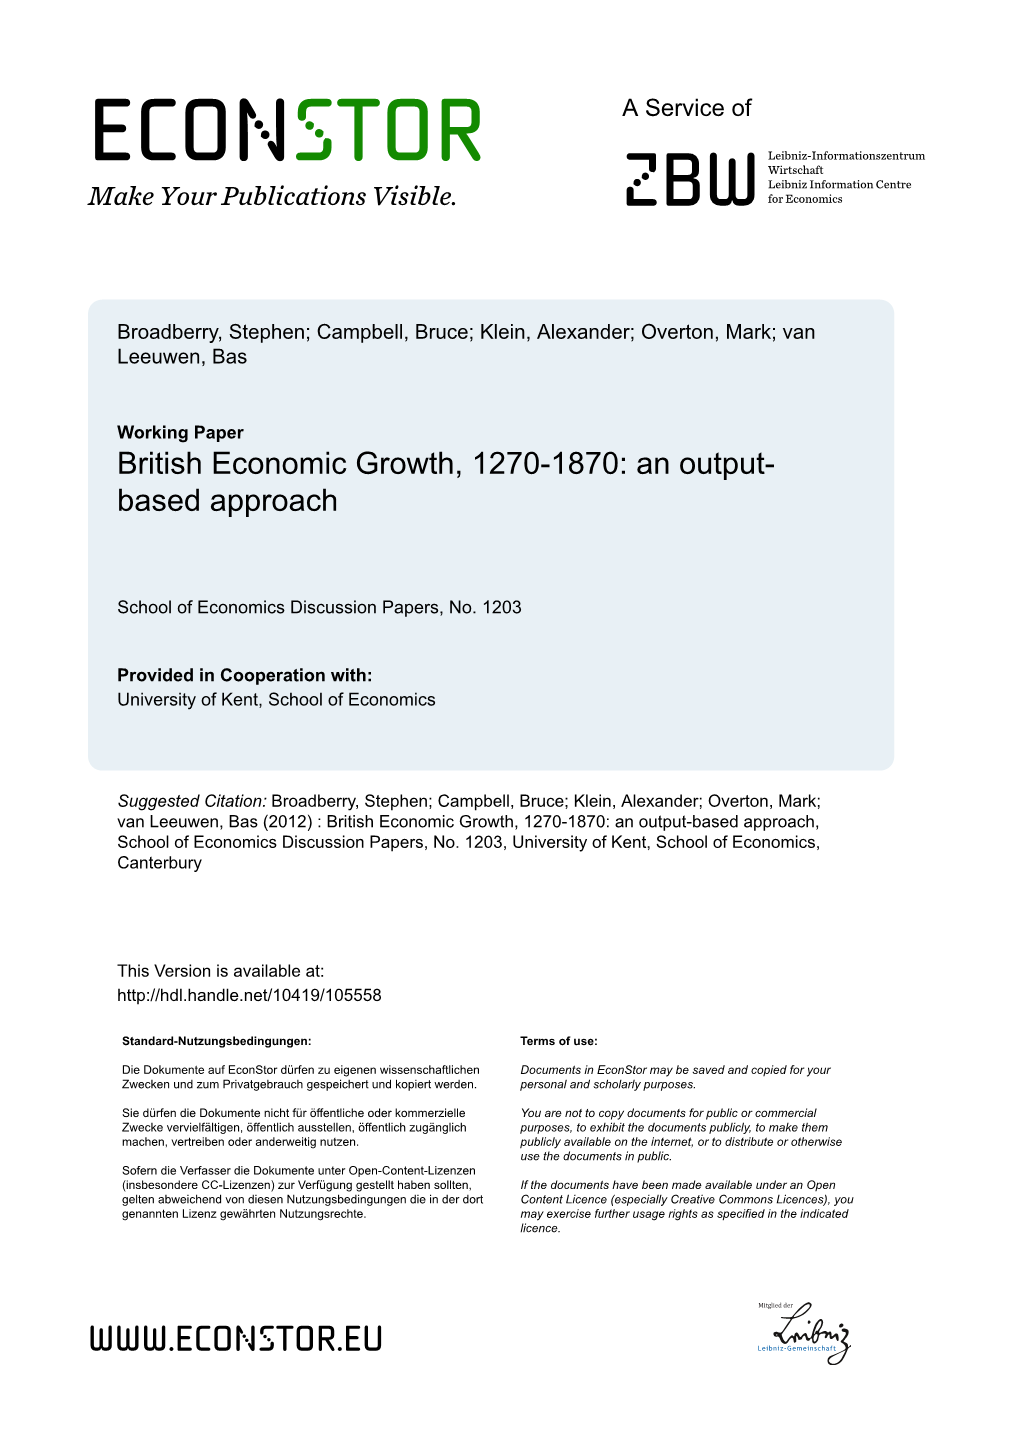 British Economic Growth, 1270-1870: an Output-Based Approach, School of Economics Discussion Papers, No